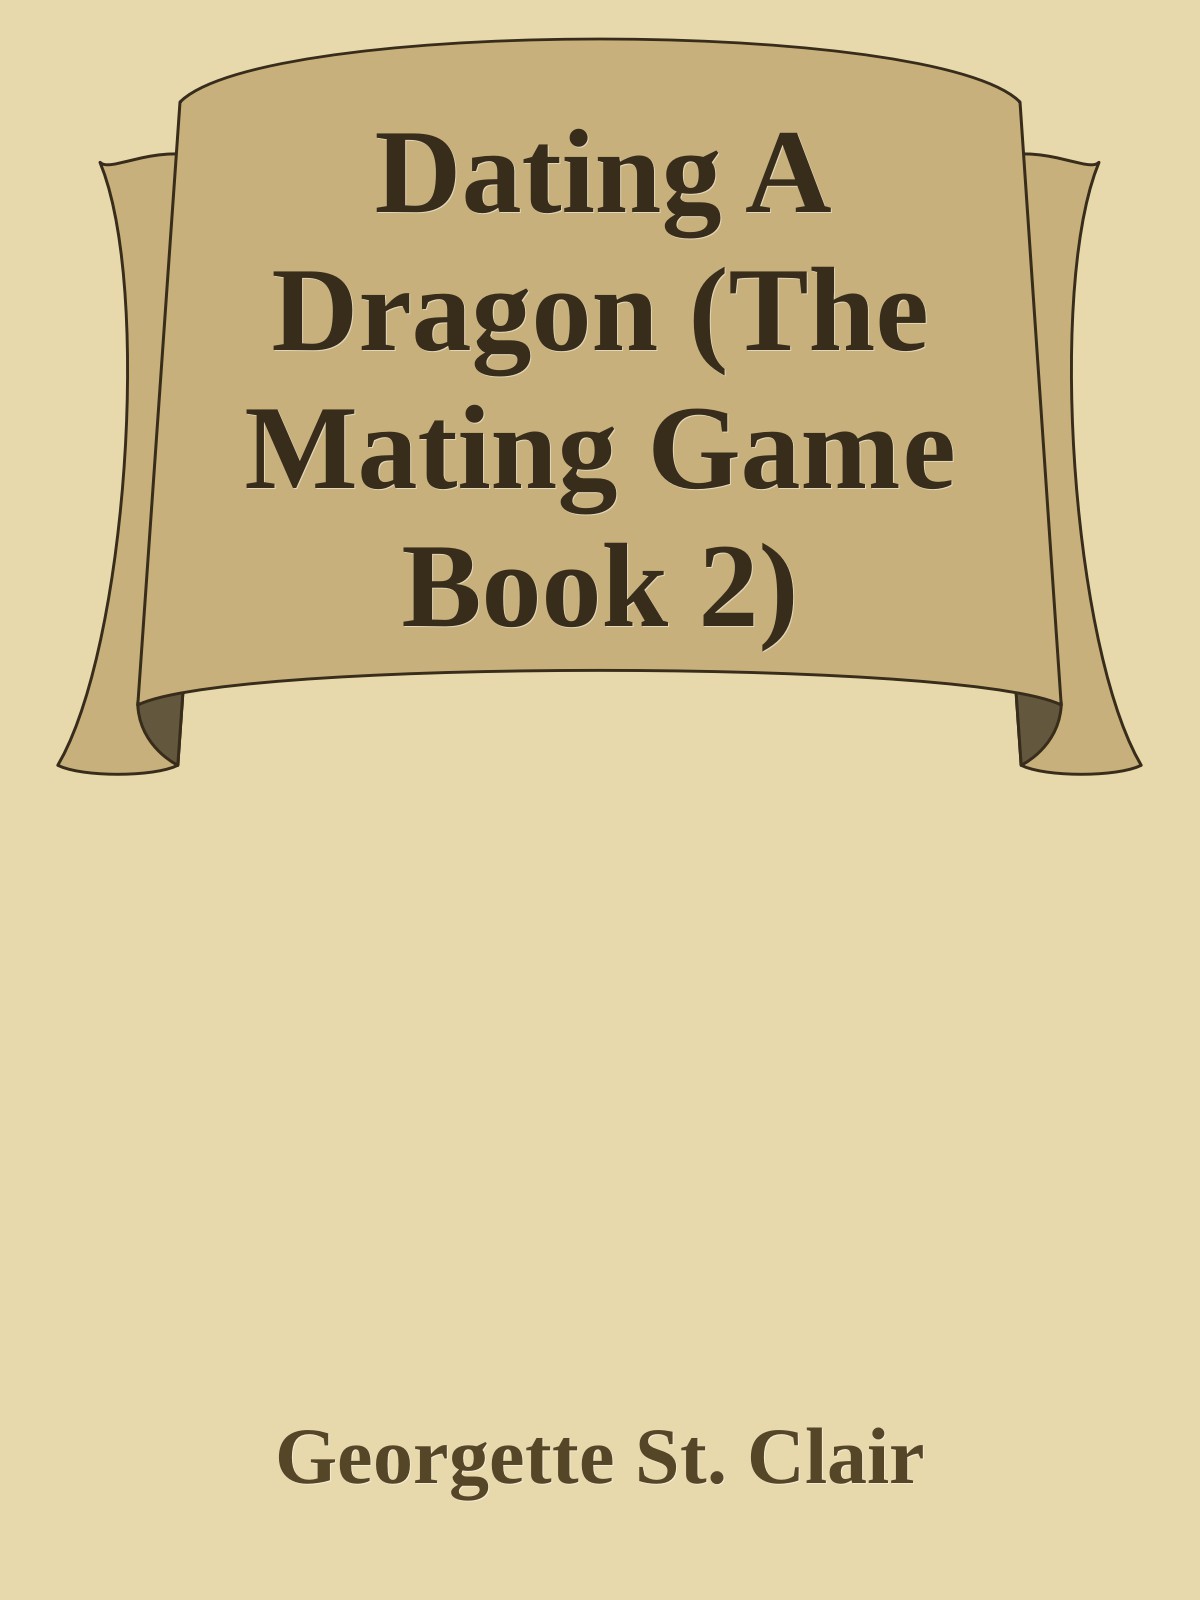 Dating A Dragon (The Mating Game Book 2) by Georgette St. Clair